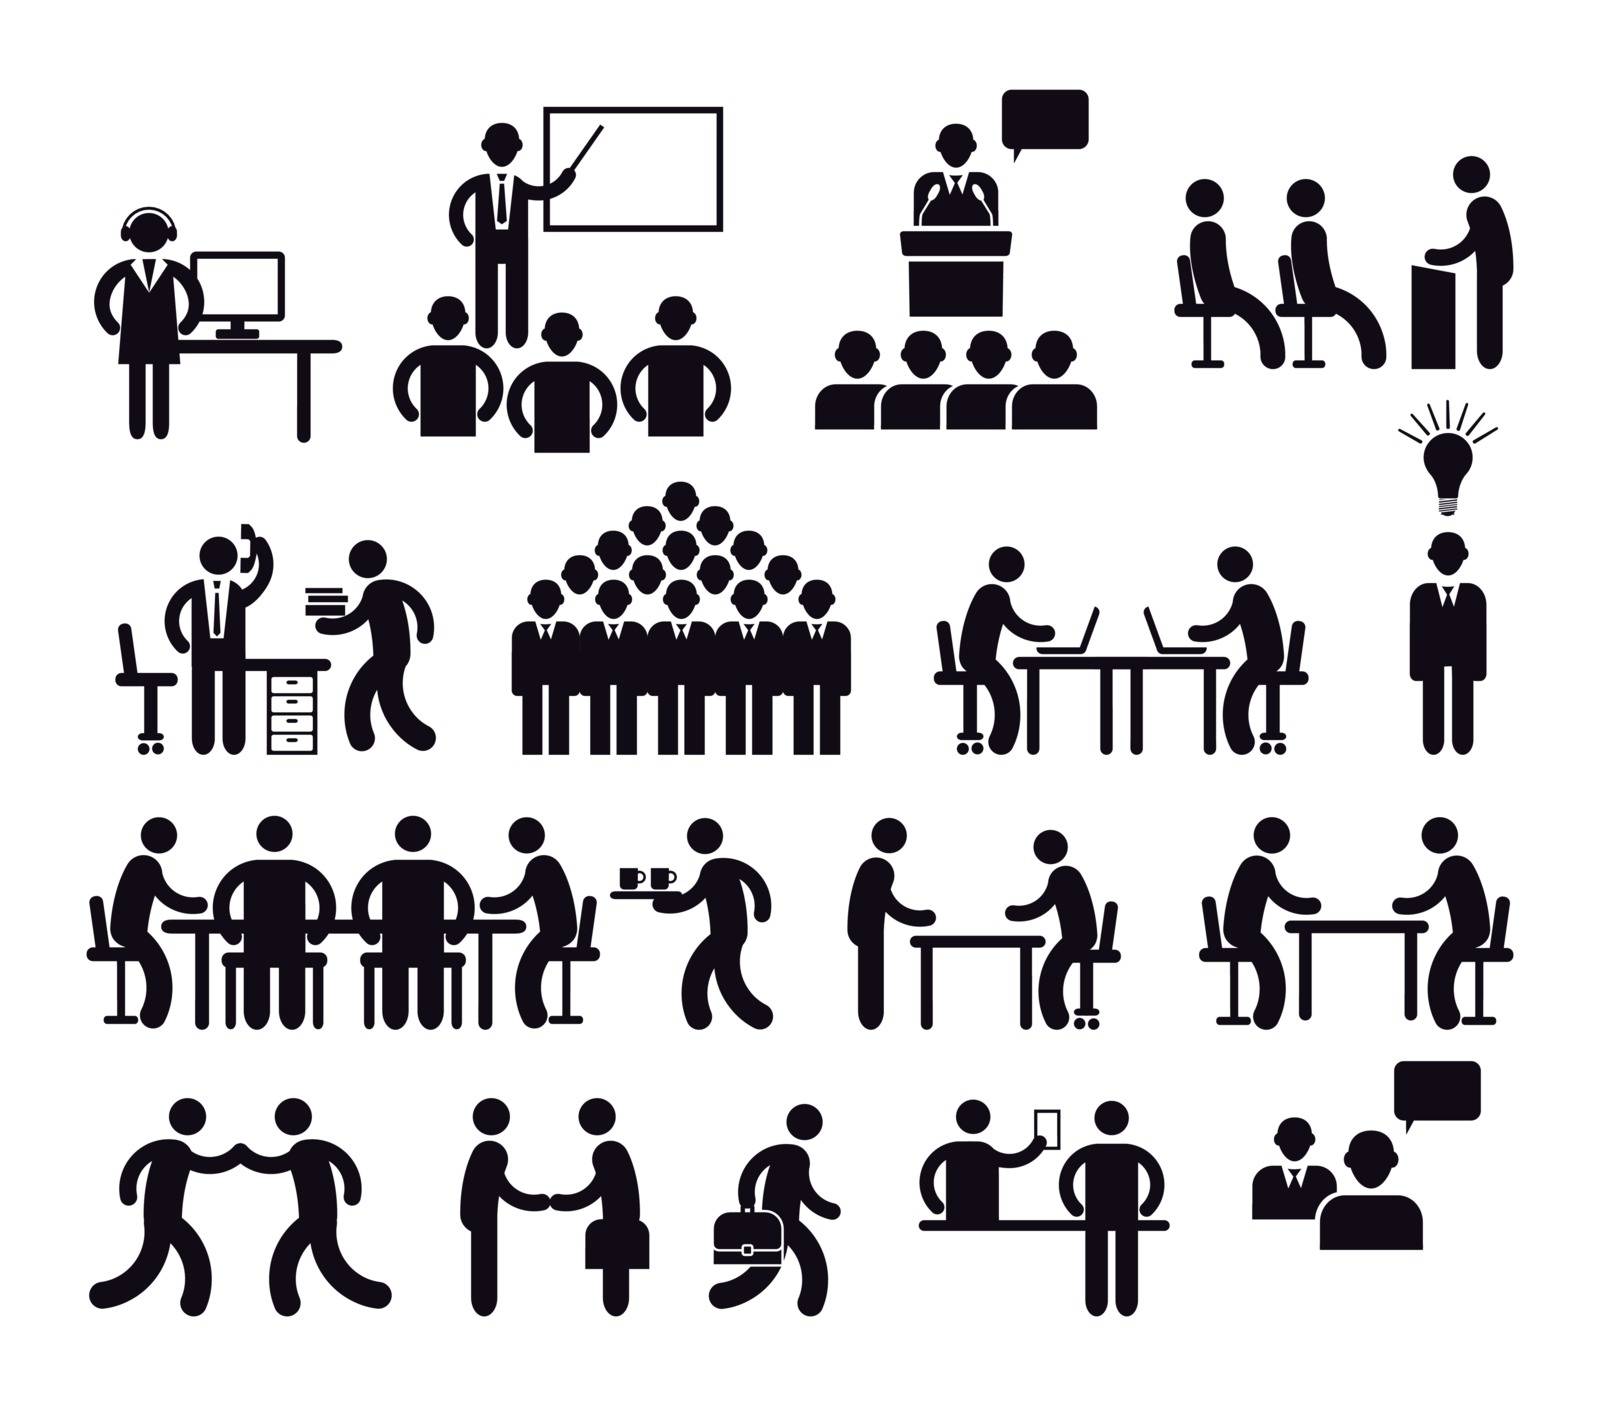 Workplace concept, pictogram illustration by scusi